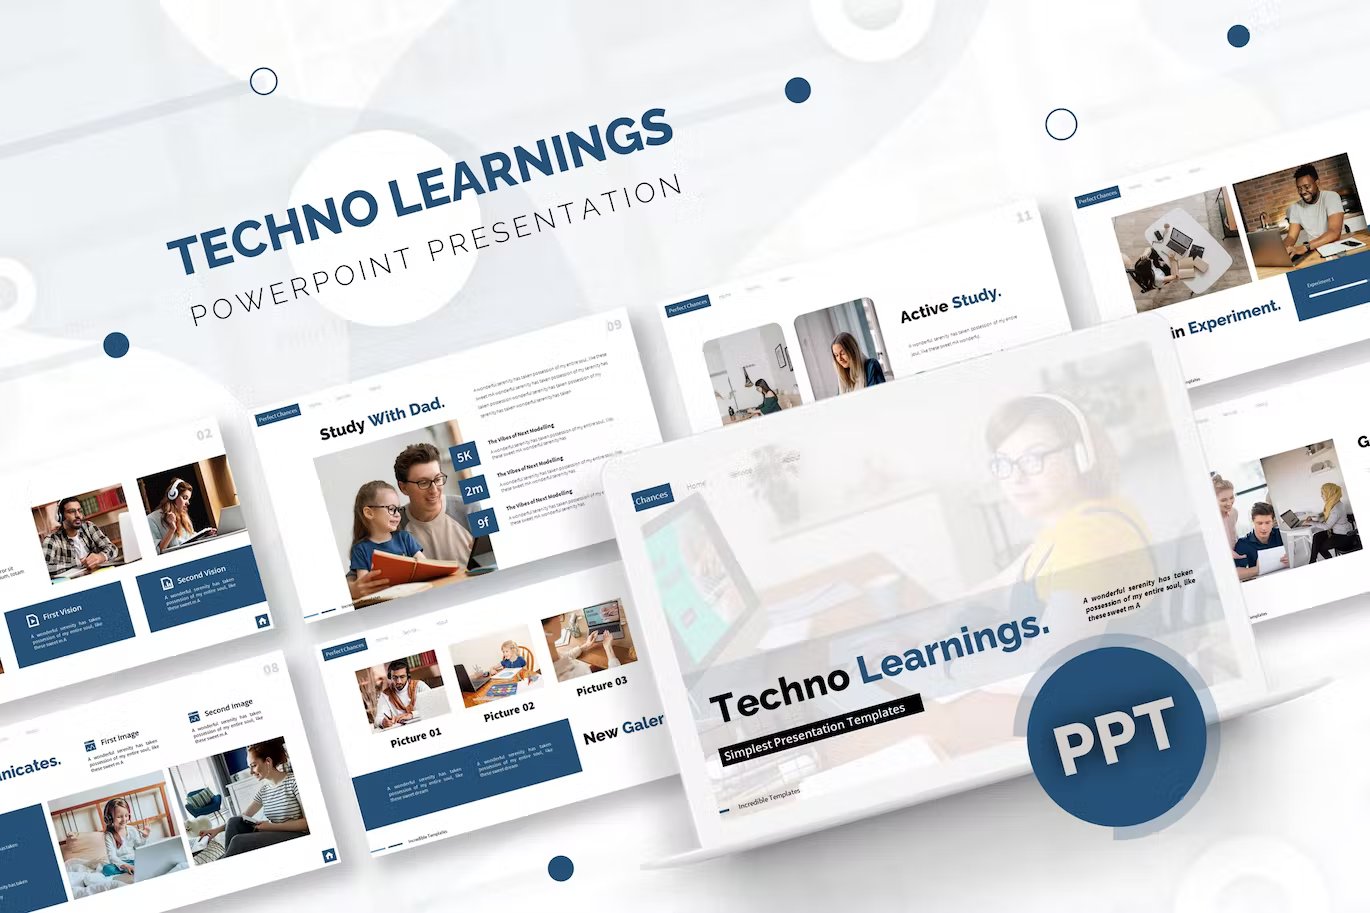 Blue lettering "Techno Learnings Powerpoint Presentation" and different presentation templates on a gray background.